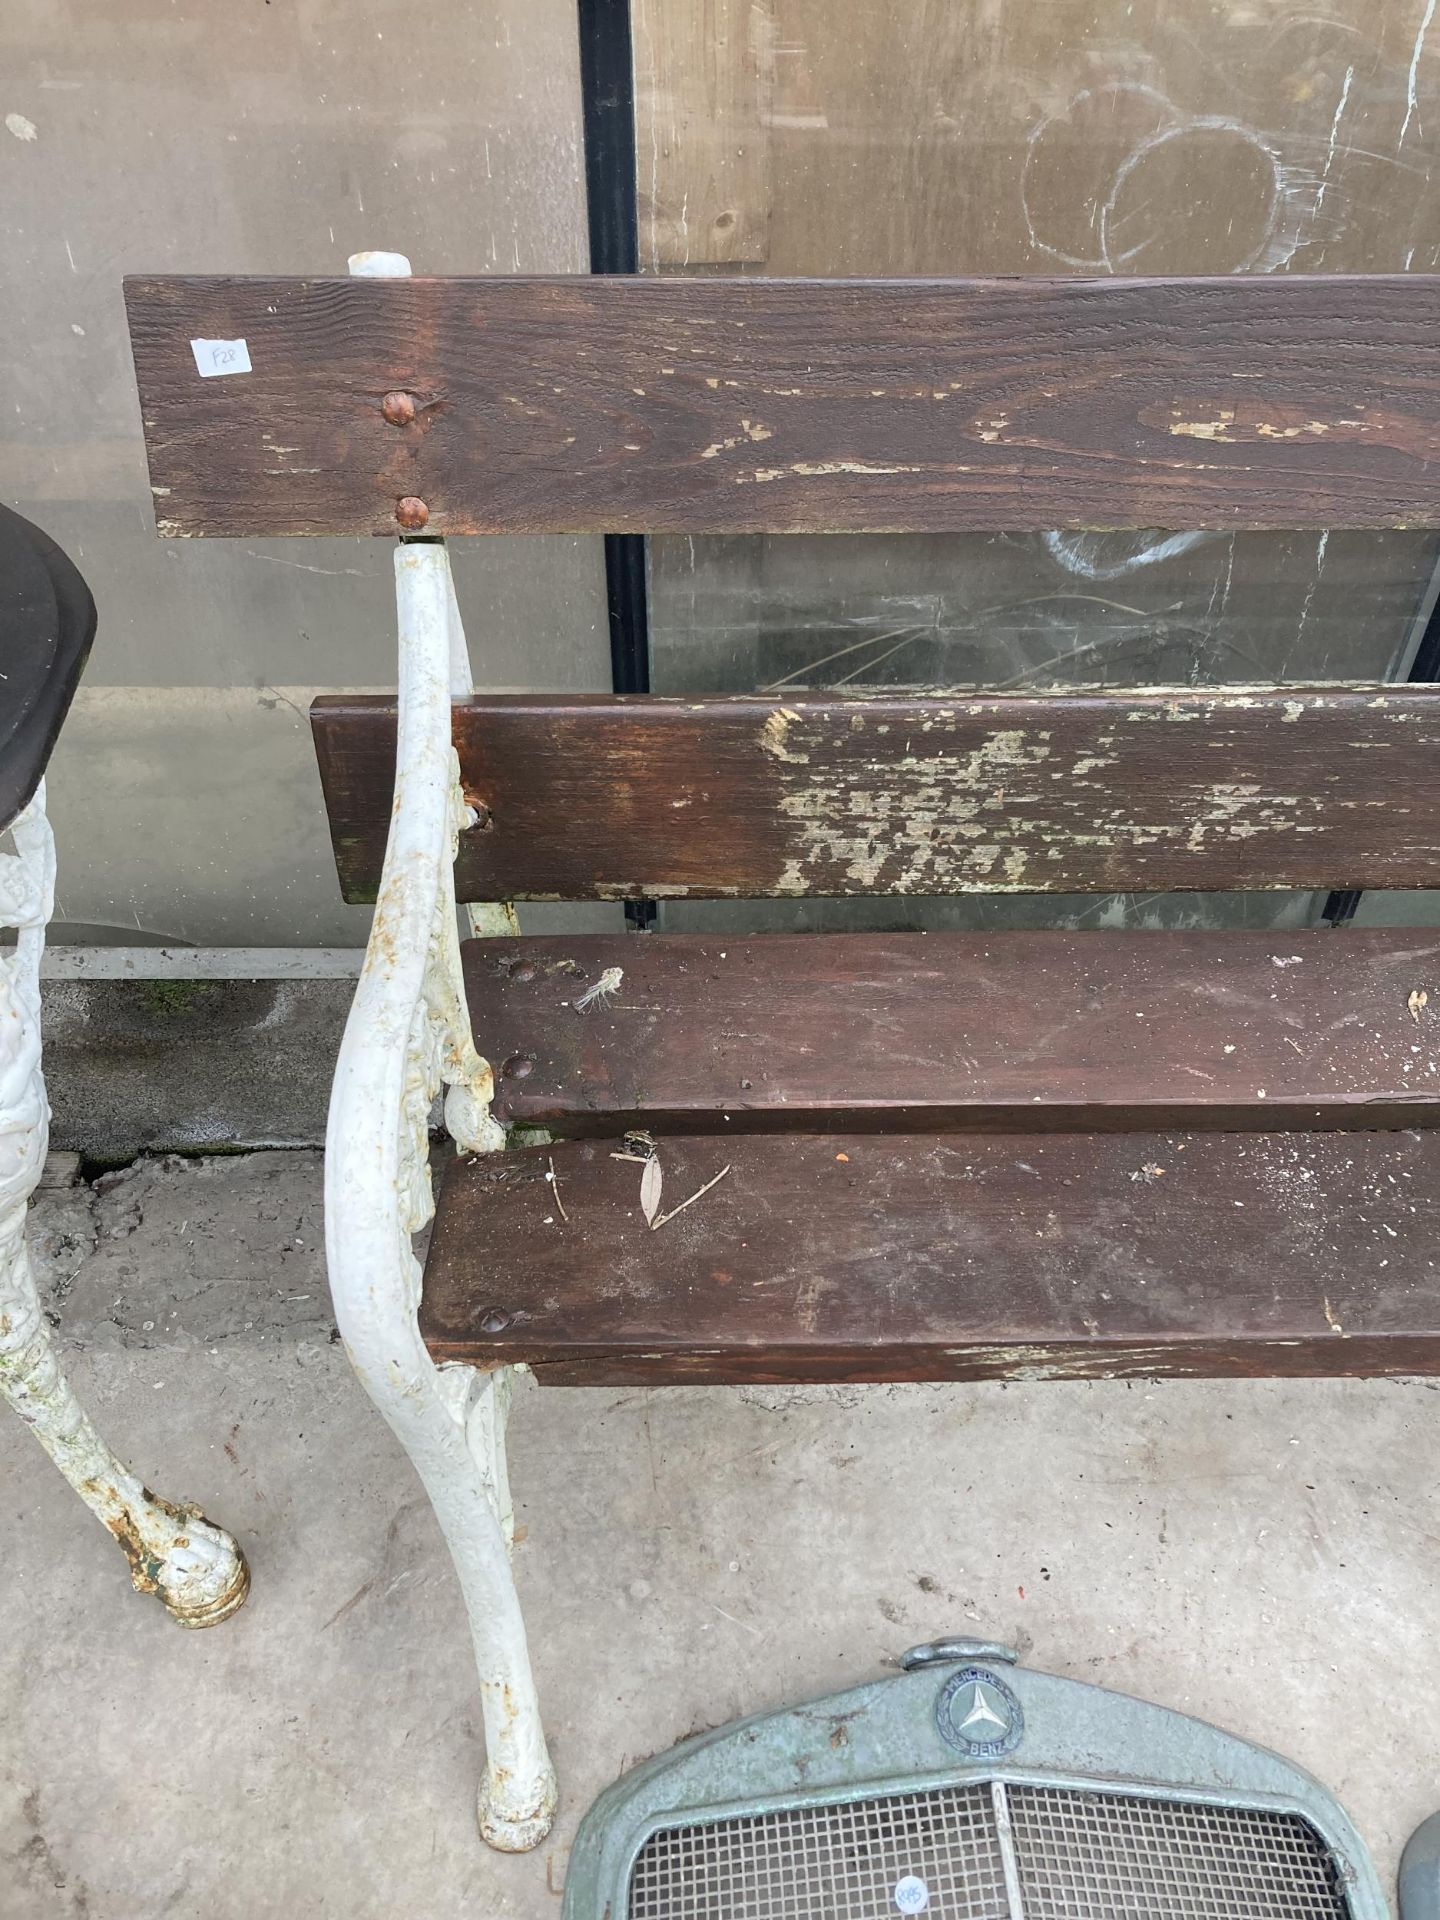 A VINTAGE WOODEN PLANK GARDEN BENCH WITH DECORATIVE CAST BENCH ENDS - Image 4 of 5